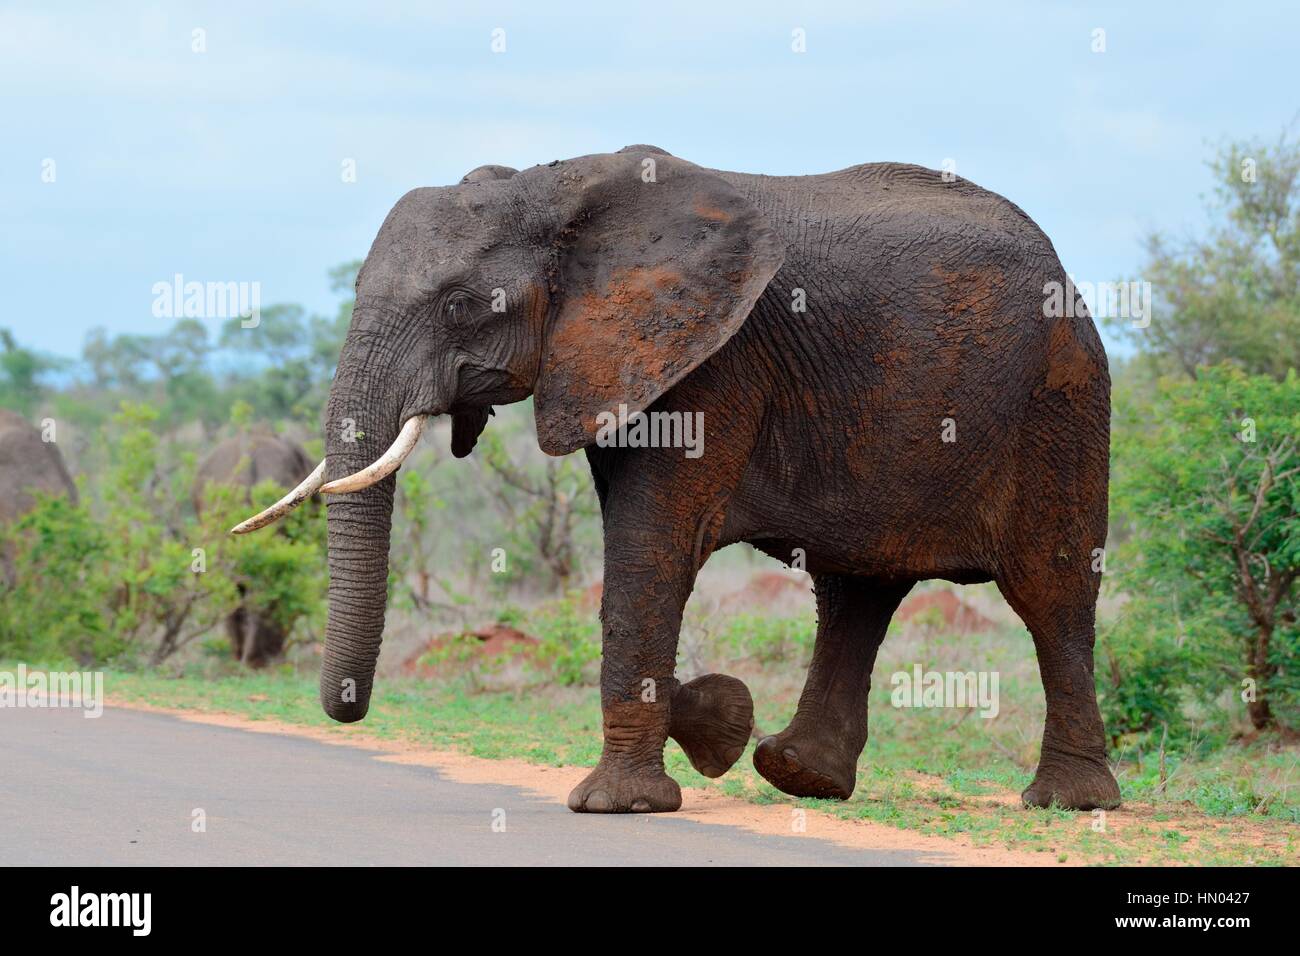 African bush elephant (Loxodonta africana) crossing a paved road, Kruger National Park, South Africa, Africa Stock Photo